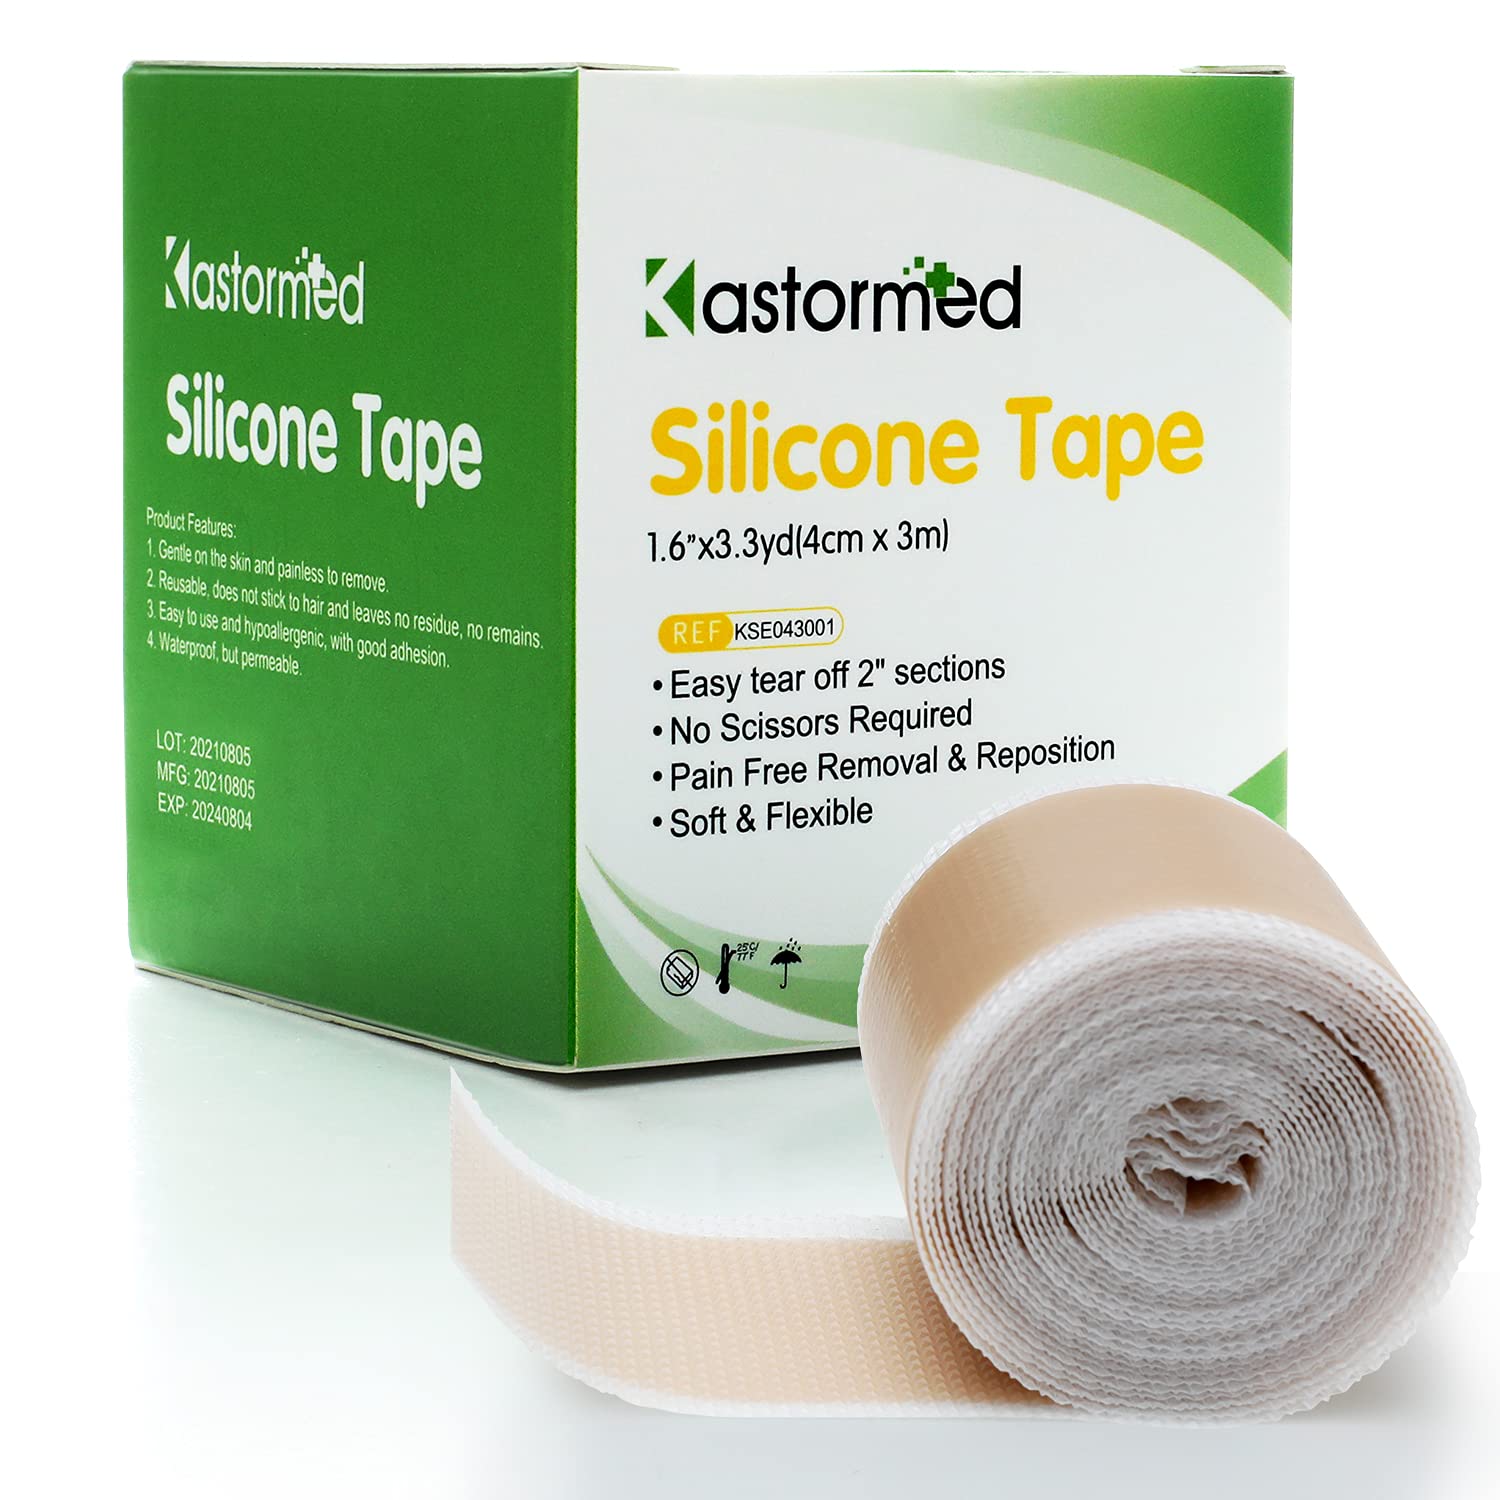 Medical Silicone Tape, Gentle Tape for Skin